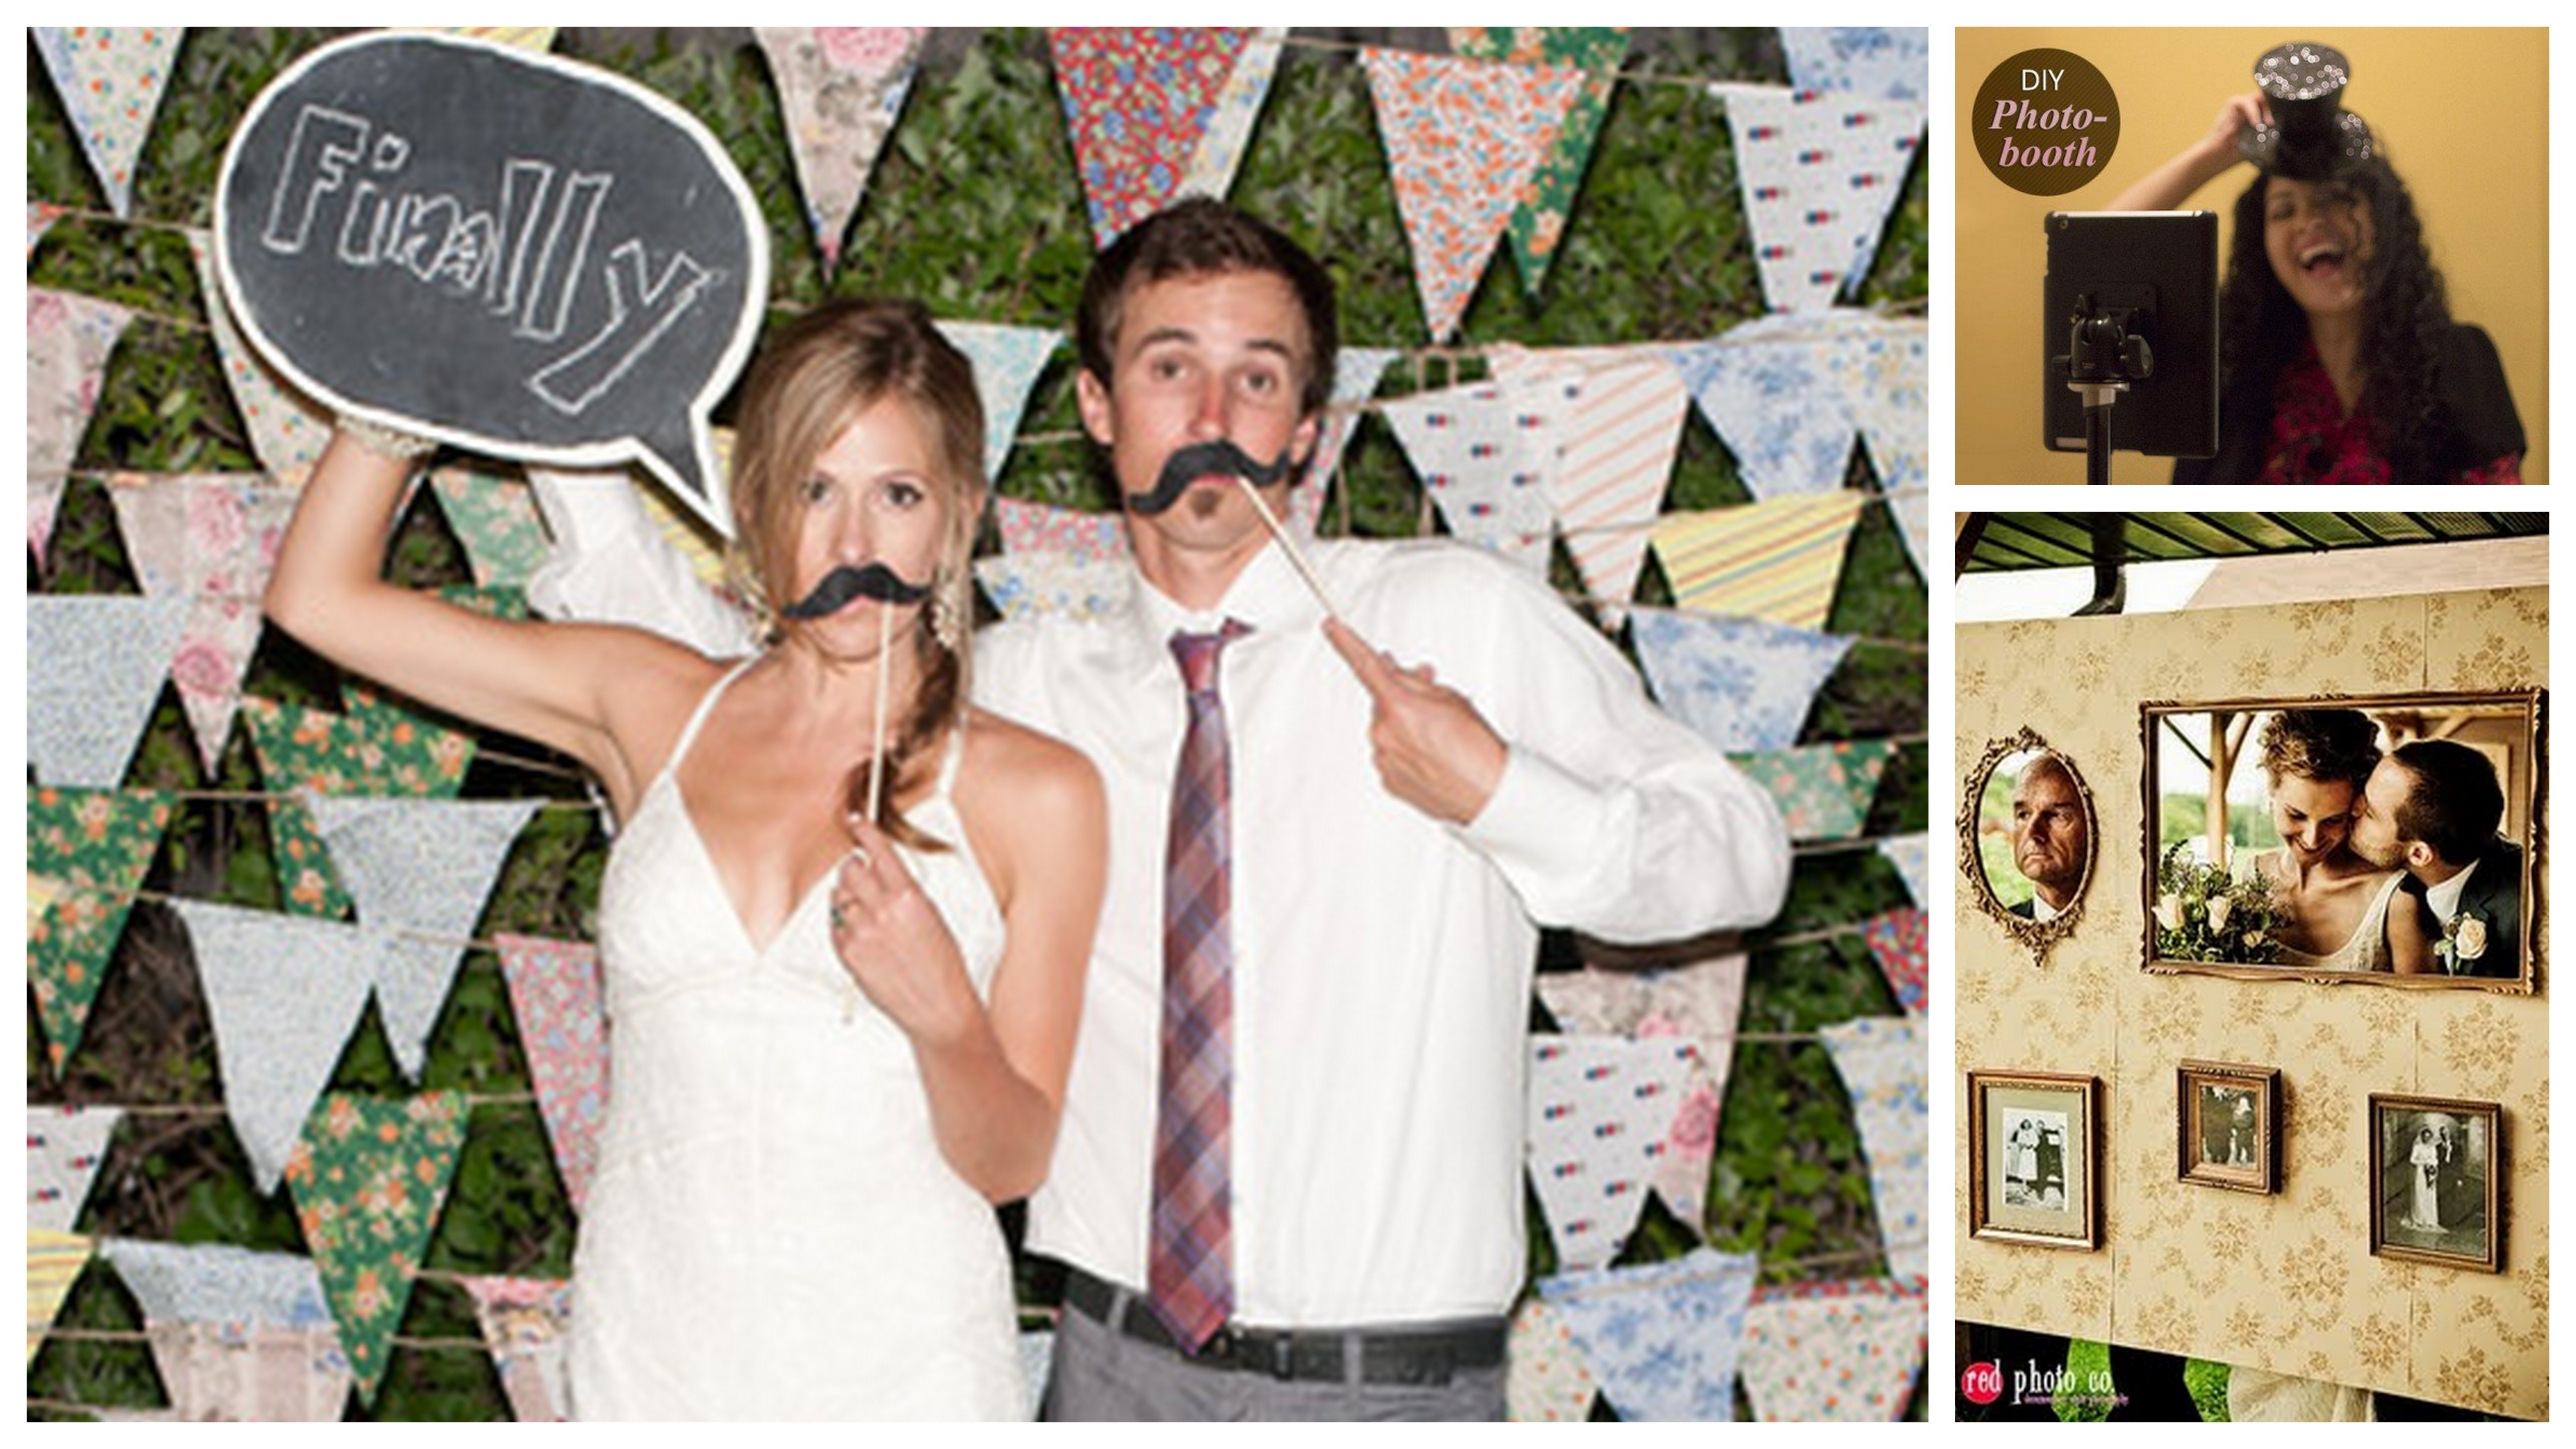 10 Most Popular Photo Booth Ideas For Weddings unique photo booth ideas keith watson events 2022